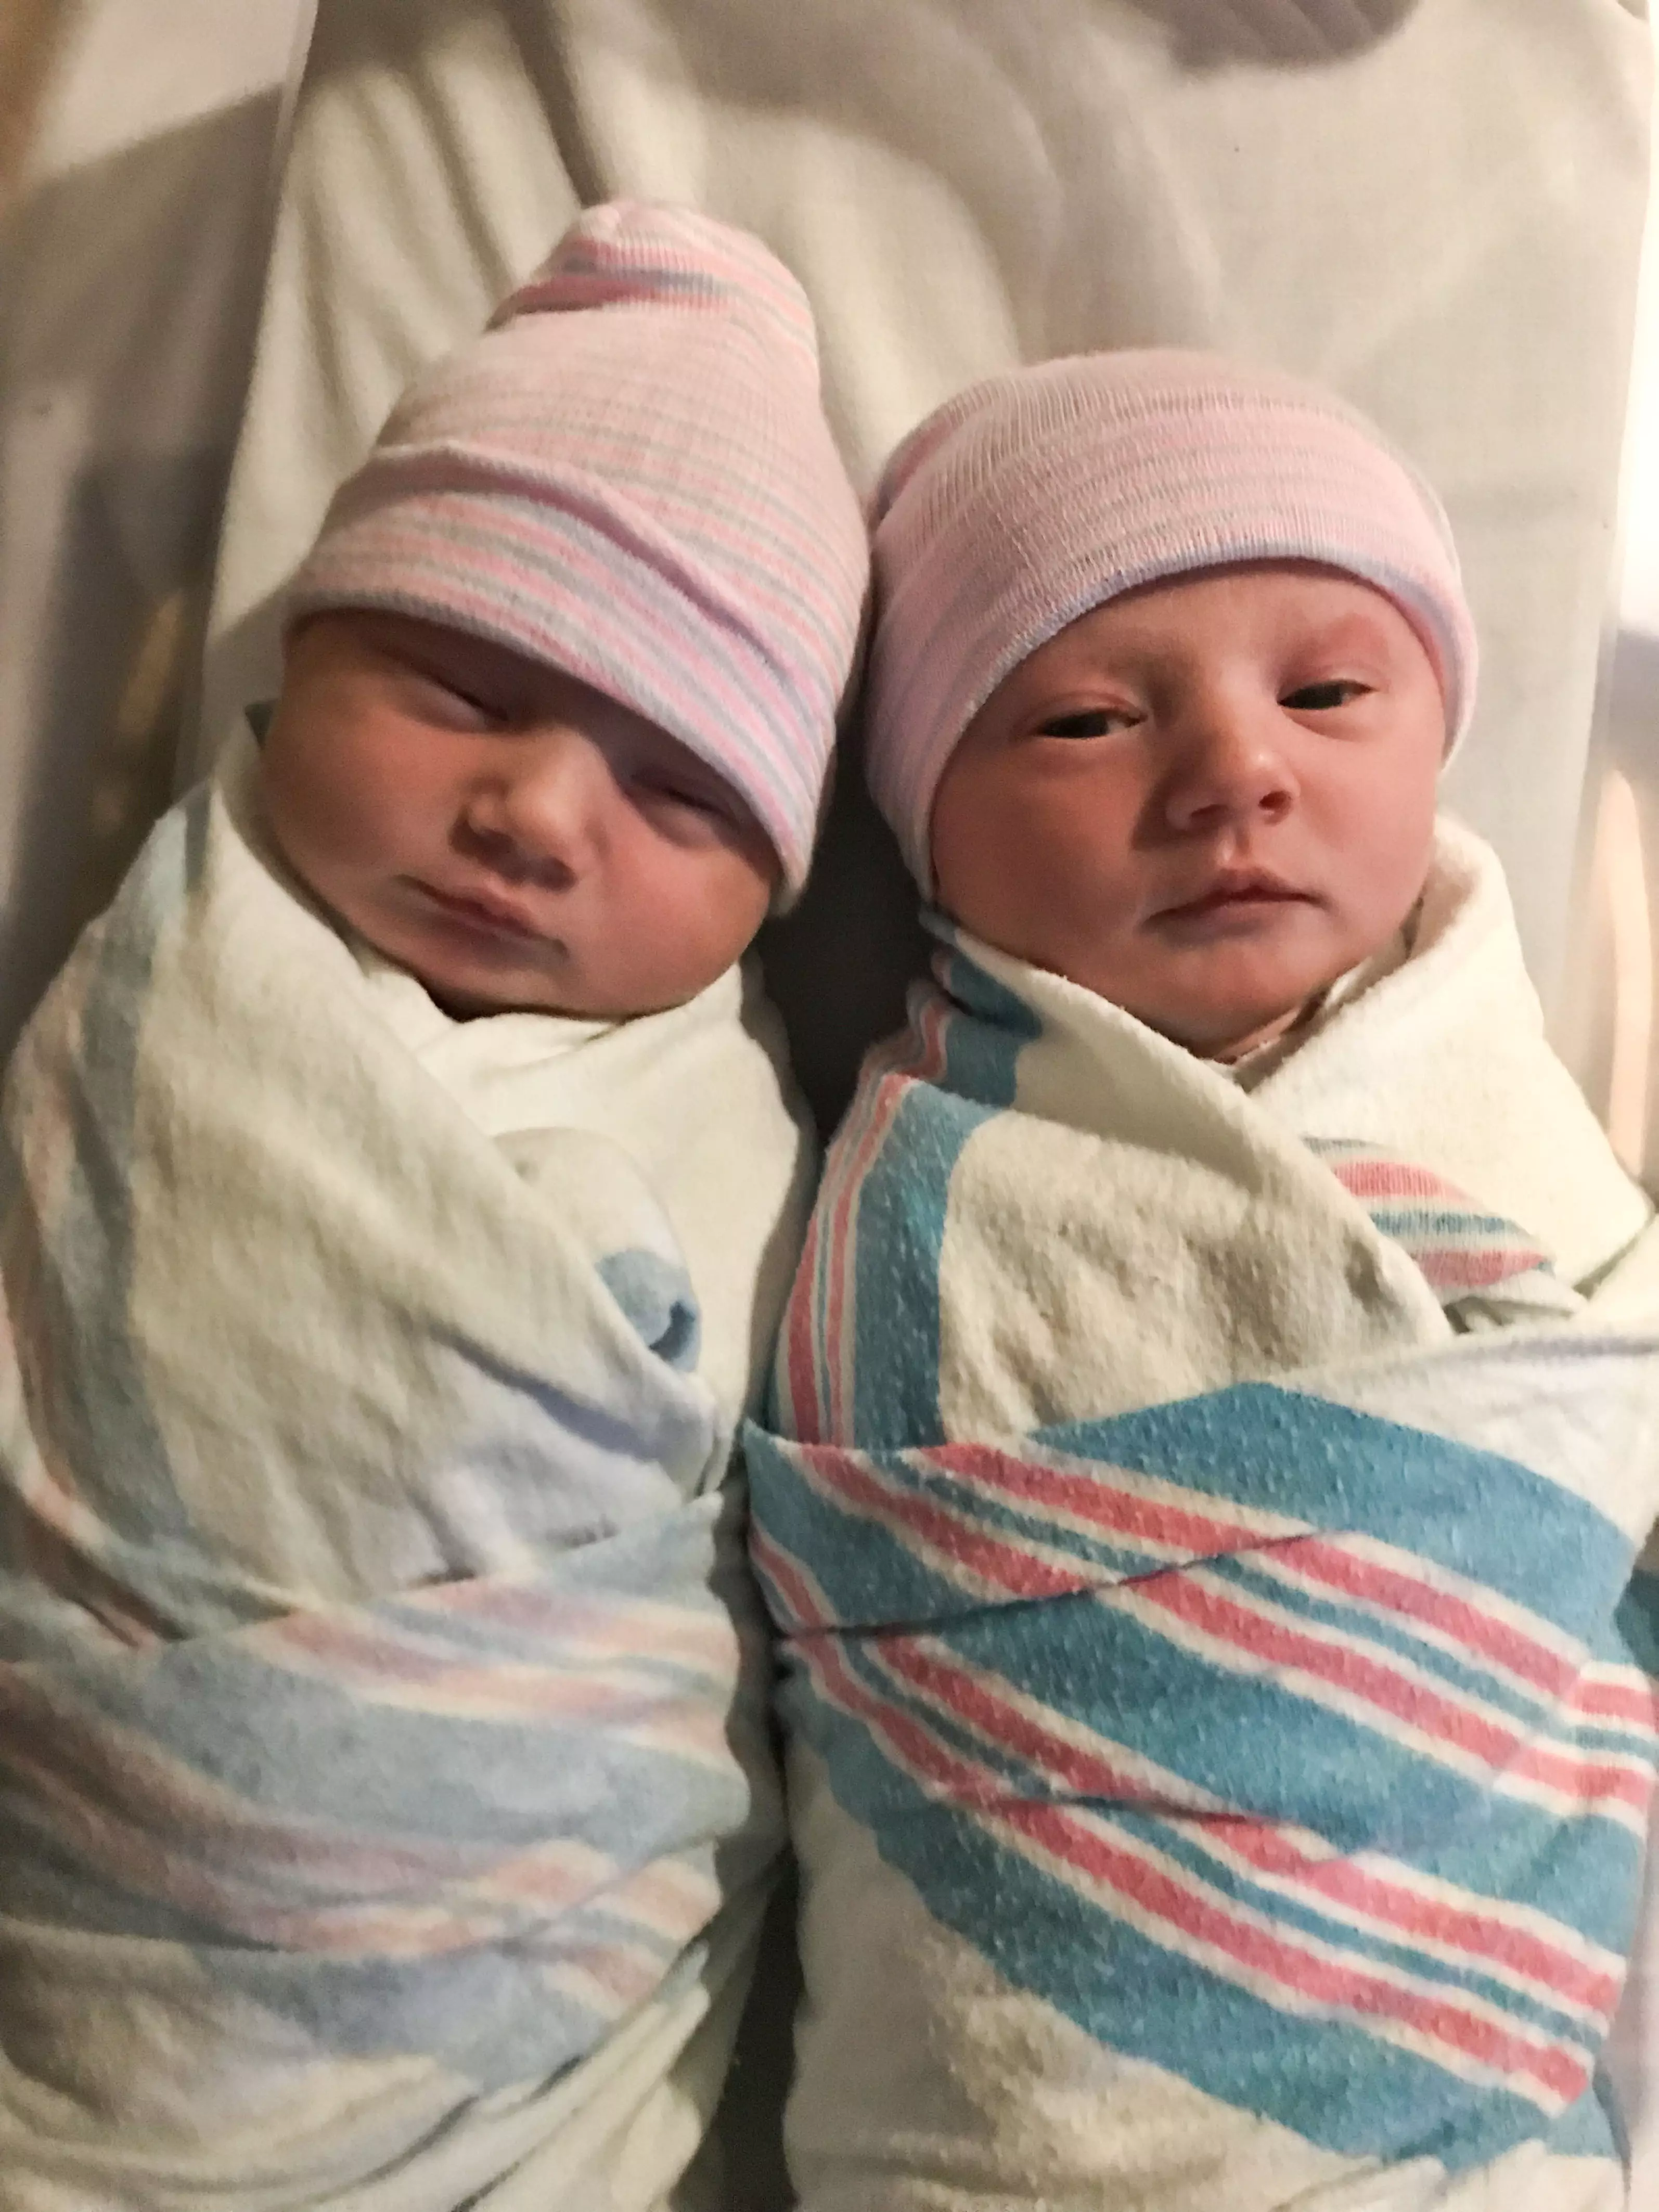 Lyndsey and Wesley had no idea they were having twins (